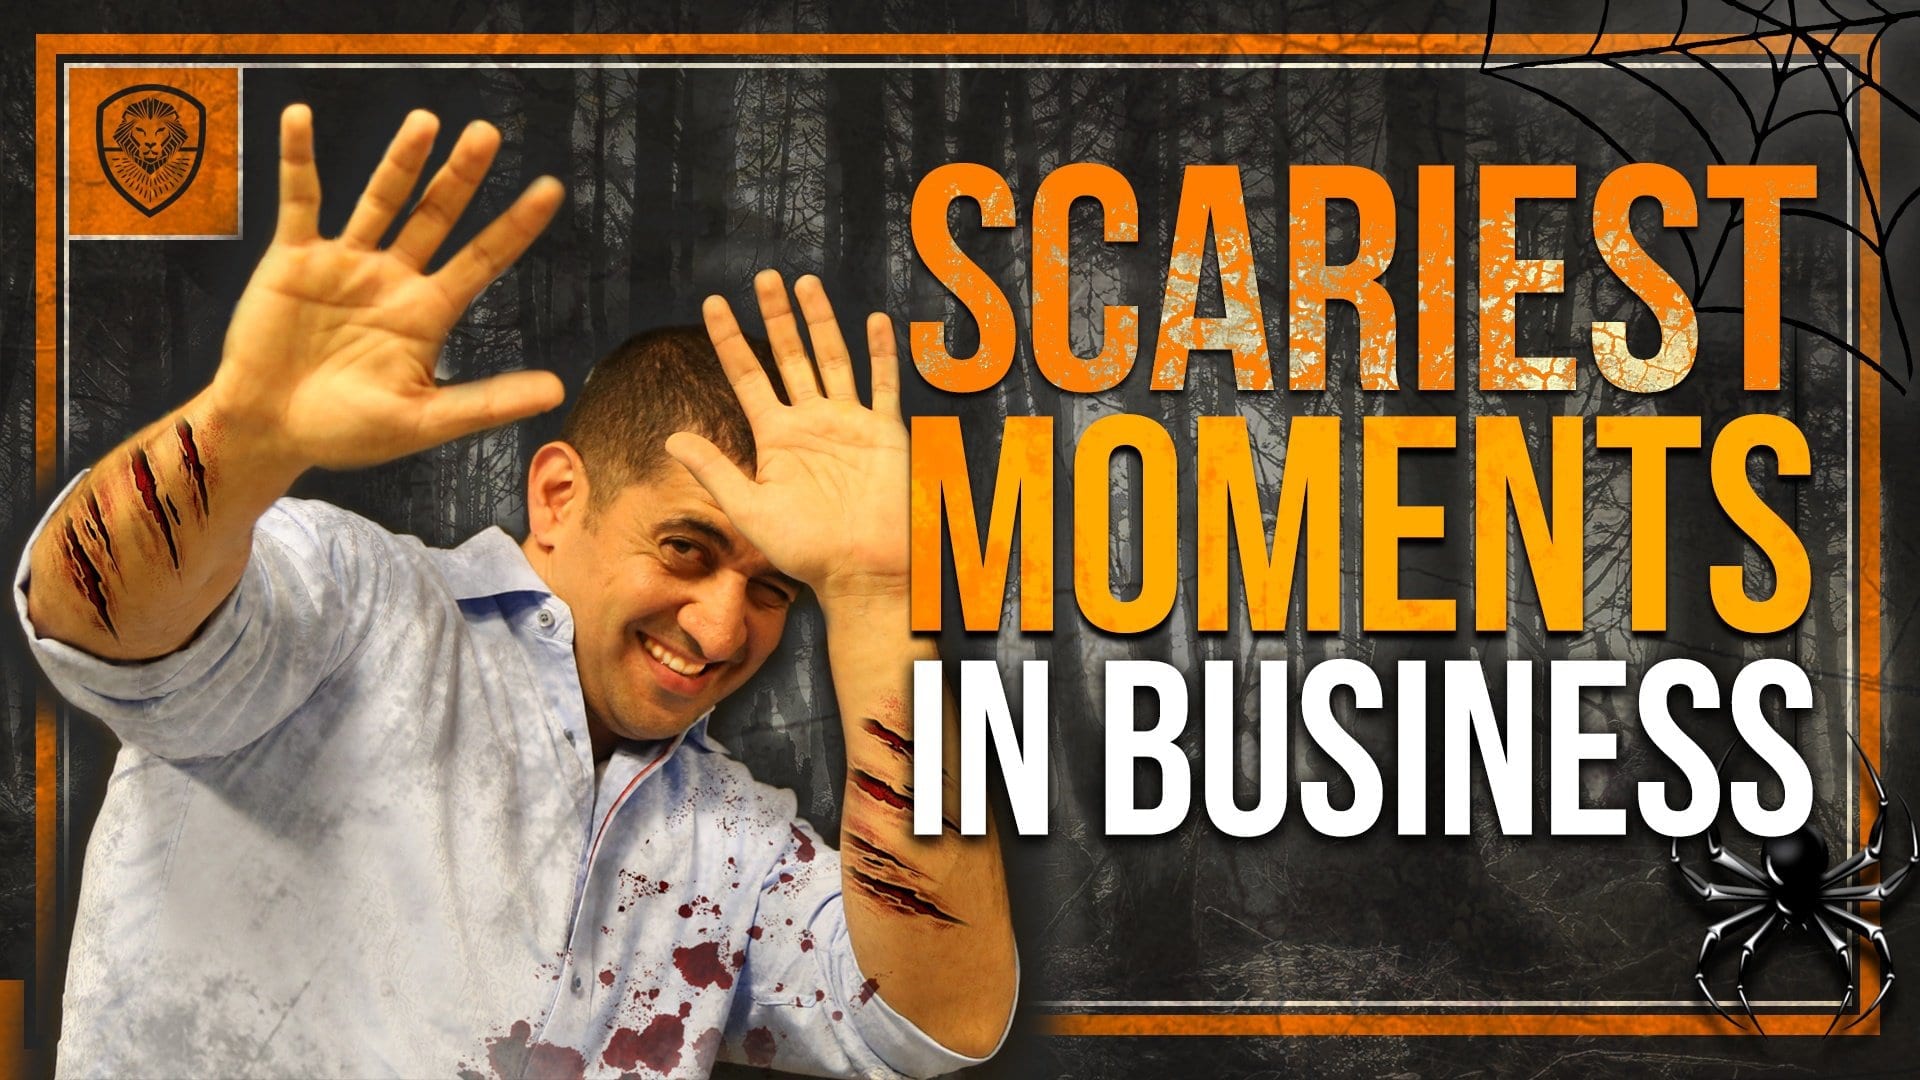 If you're a startup entrepreneur, you need to be prepared for the scariest moments in business. Here are some of my horror stories, and how I overcame them.